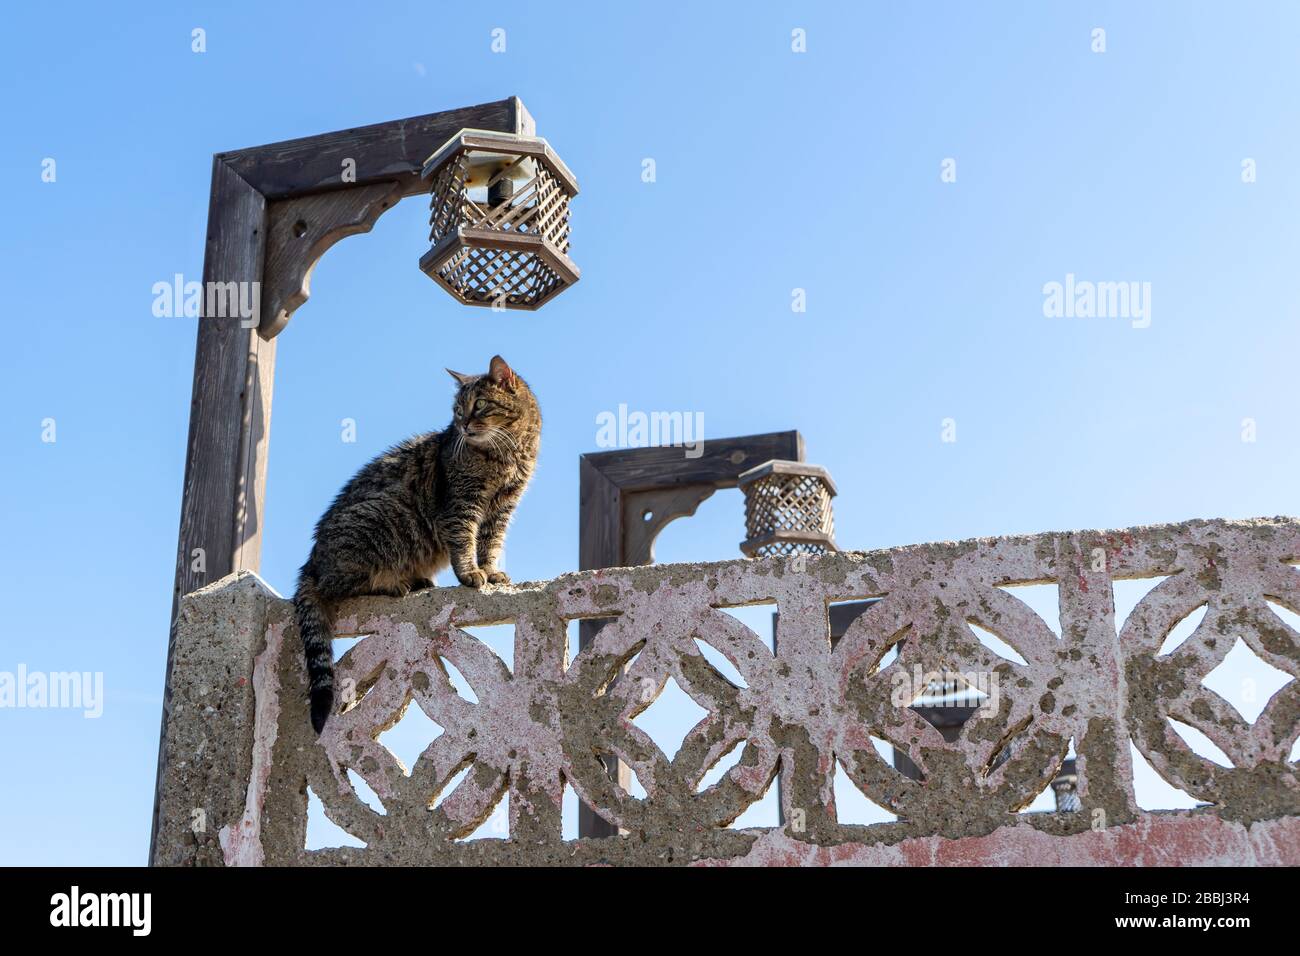 Angry brown street cat is standing on a garden wall and watching street. It is not friendly animal. It is wild. Cute and beautiful cat. Stock Photo